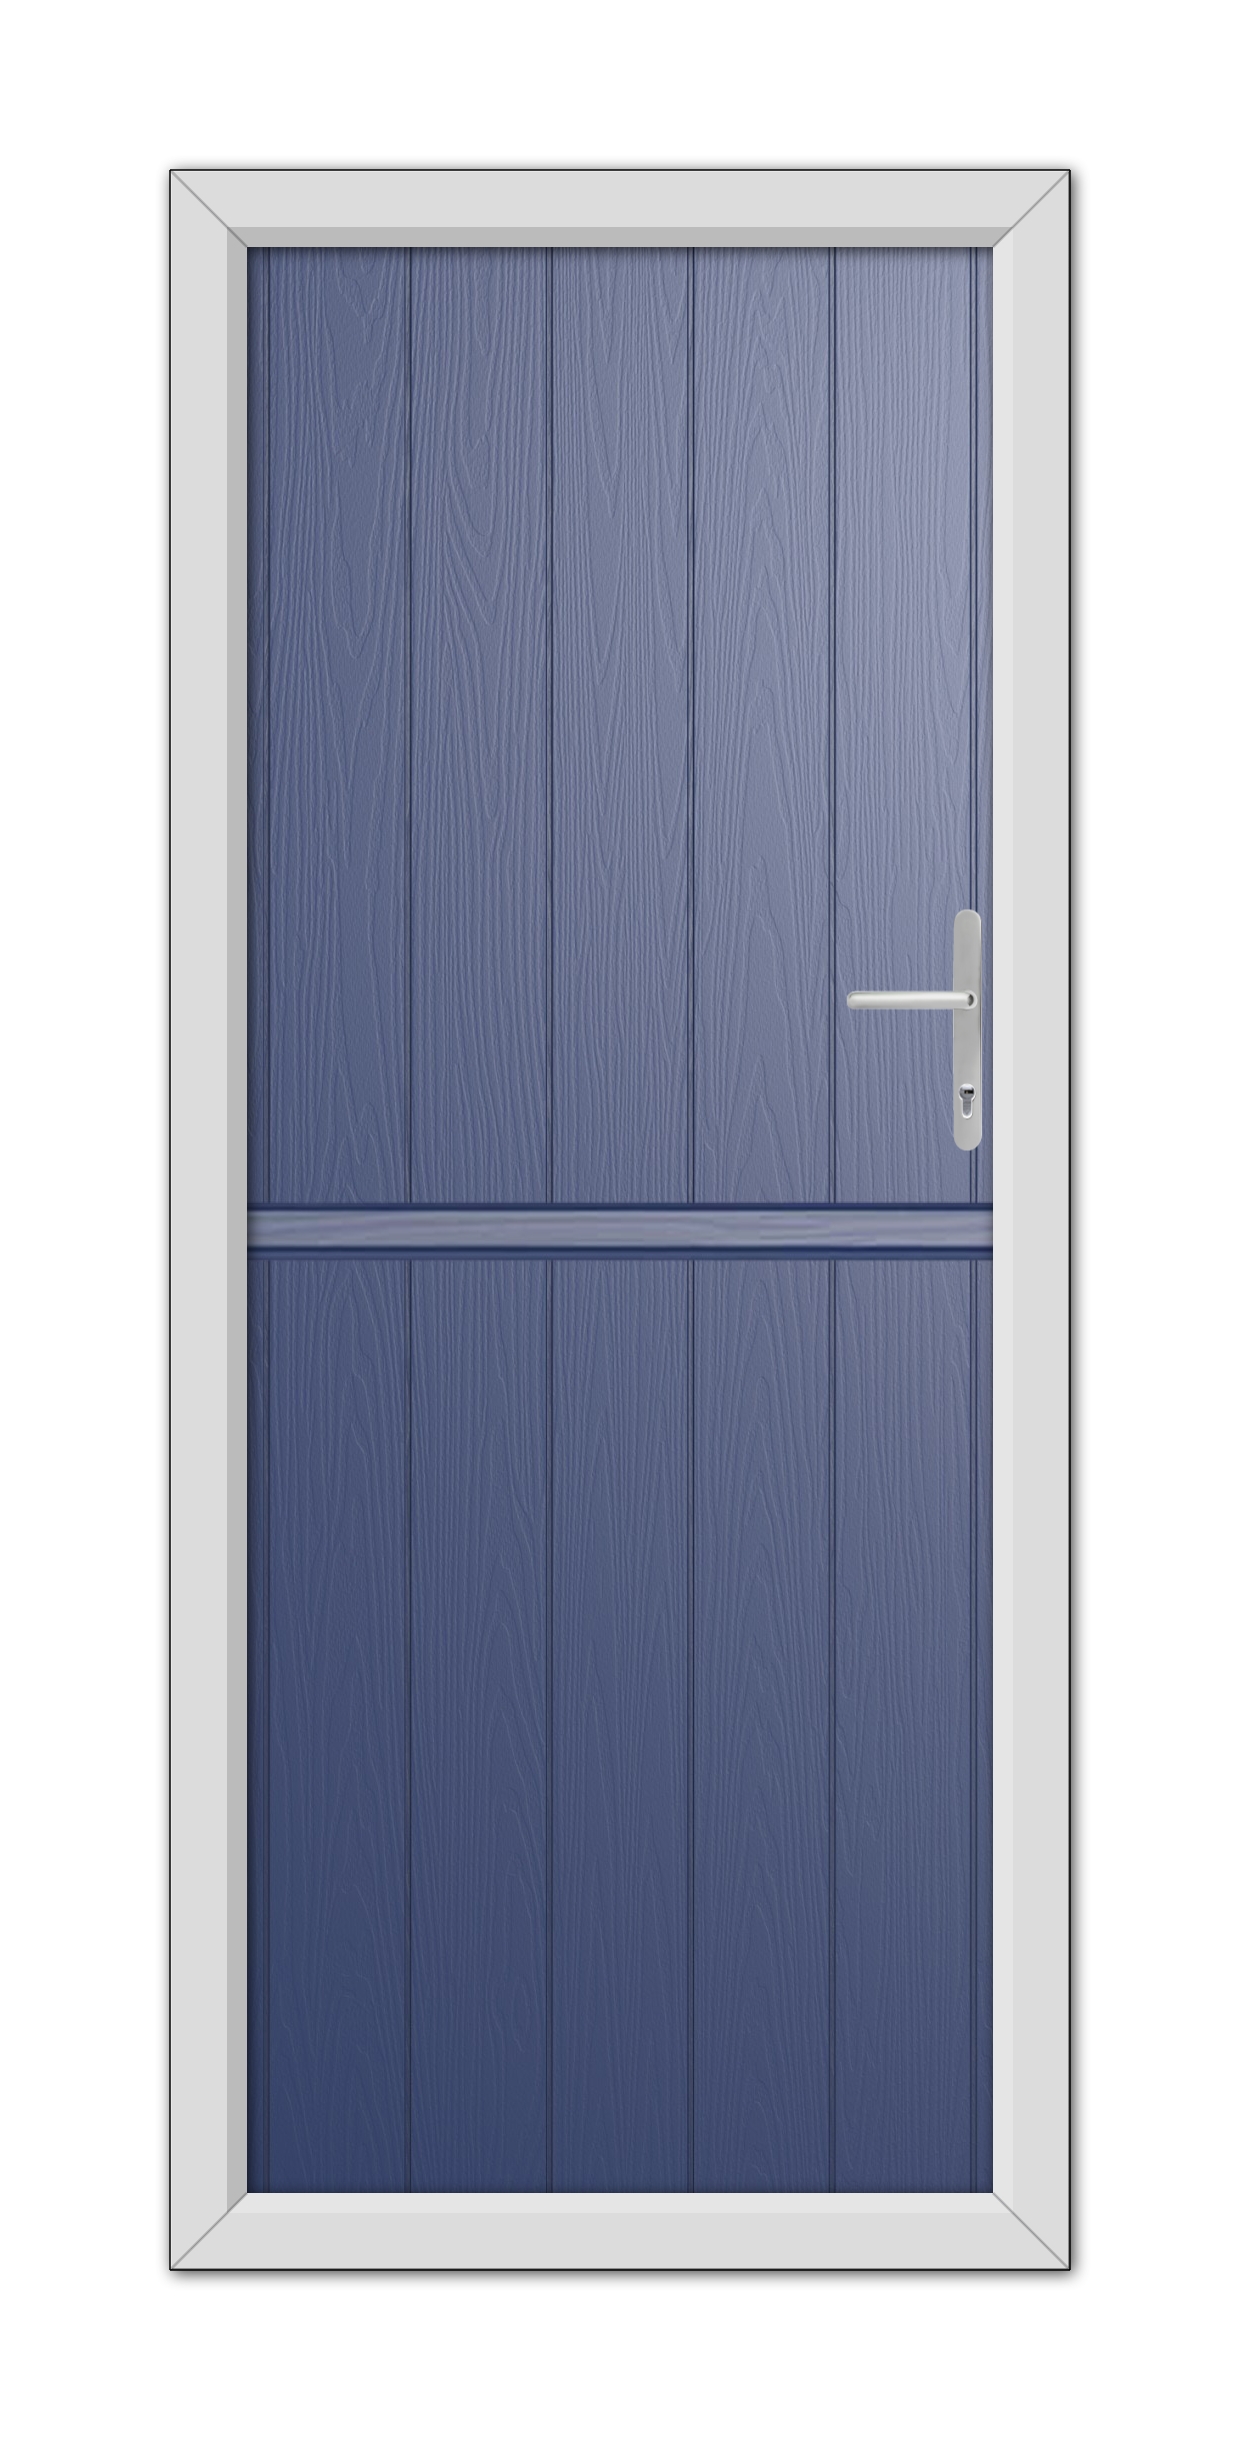 A Blue Norfolk Solid Stable Composite Door 48mm Timber Core with a horizontal division in the middle, set in a white frame, featuring a silver handle on the right side.